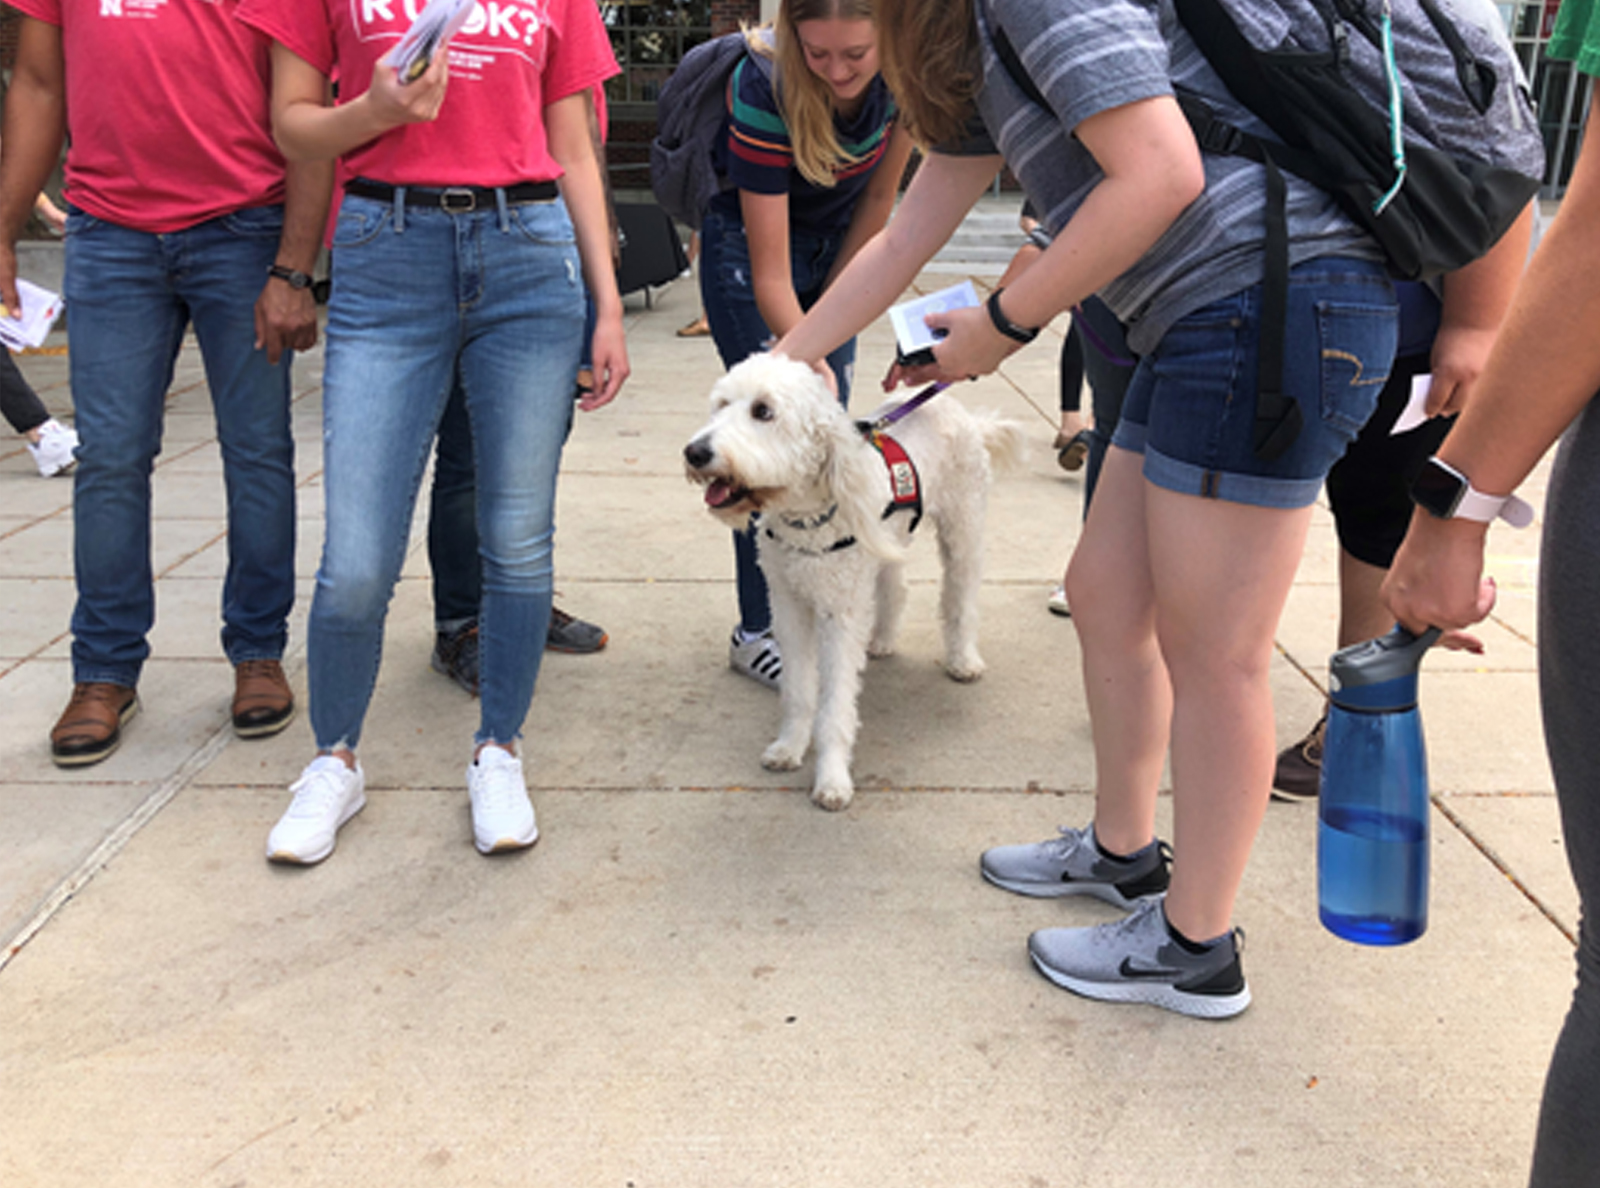 Students with a therapy dog at an RU OK event